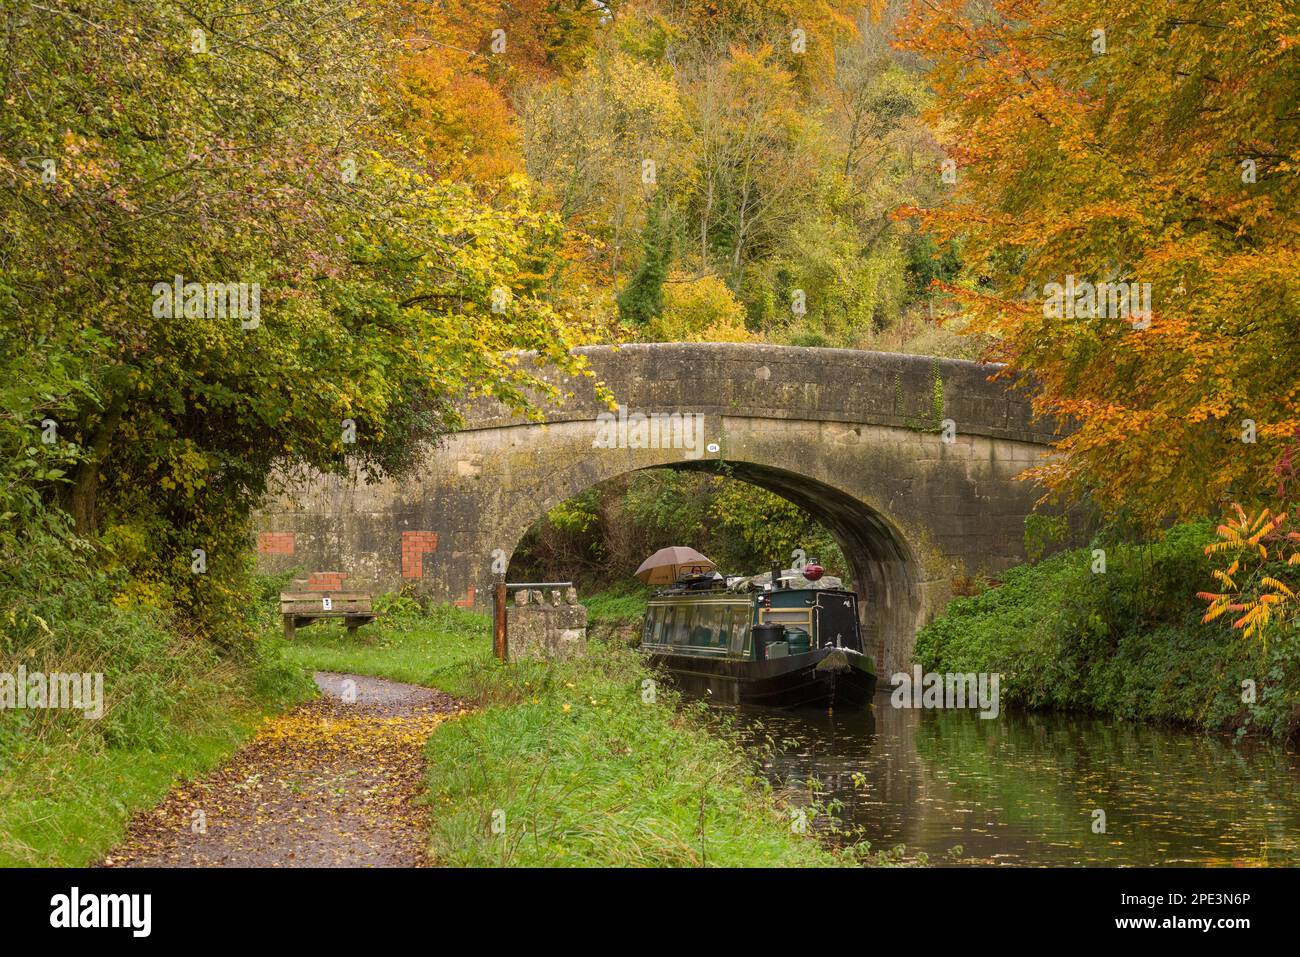 Winsley Bridge on the Kennet and Avon Canal surrounded by autumn colour, Winsley, Wiltshire, England. Stock Photo